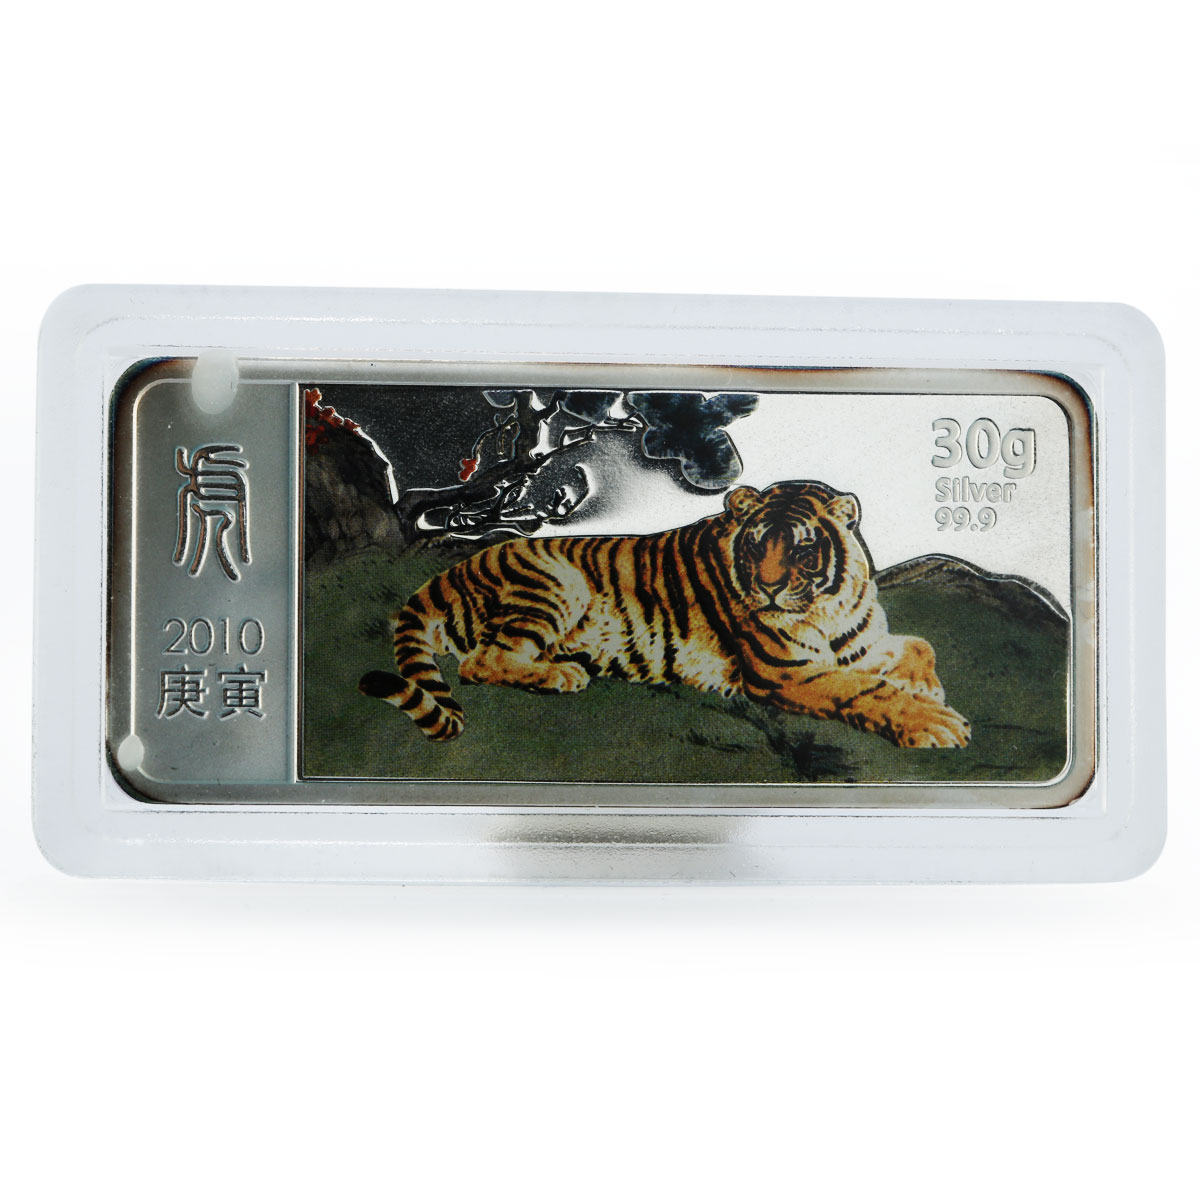 Liberia 10 dollars Year of the Tiger colored proof silver coin 2010